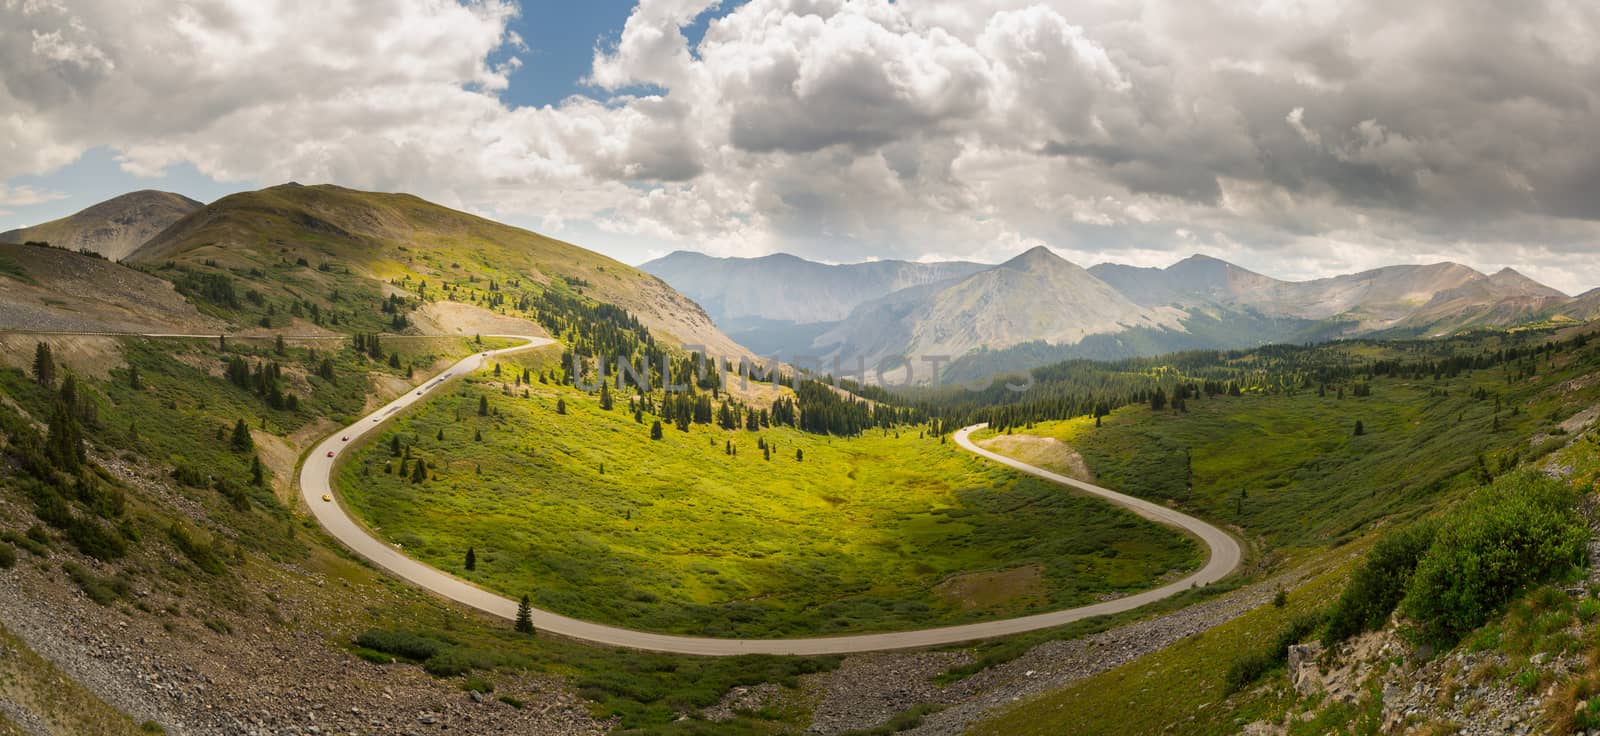 Panorama of wide curving bend on road climbing to top of Cottonwood Pass in Colorado as sports cars race to summit